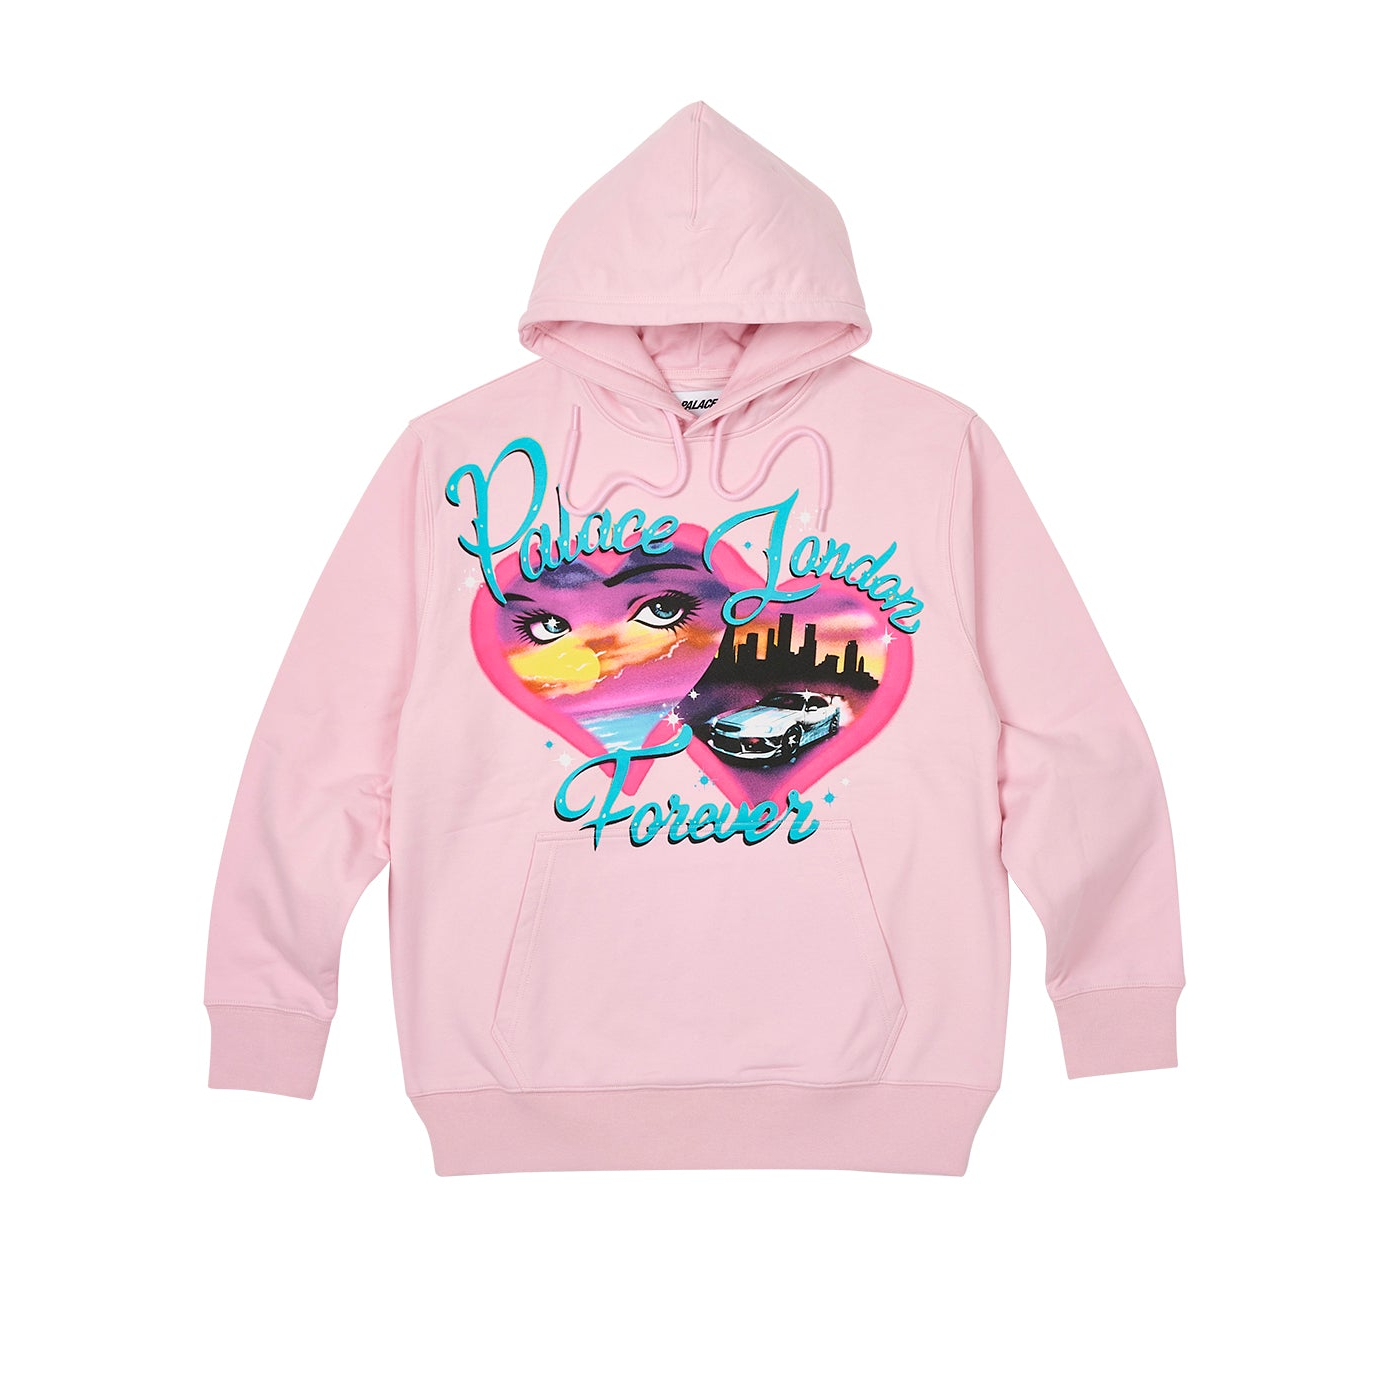 Thumbnail PALACE FOREVER HOOD PINK one color